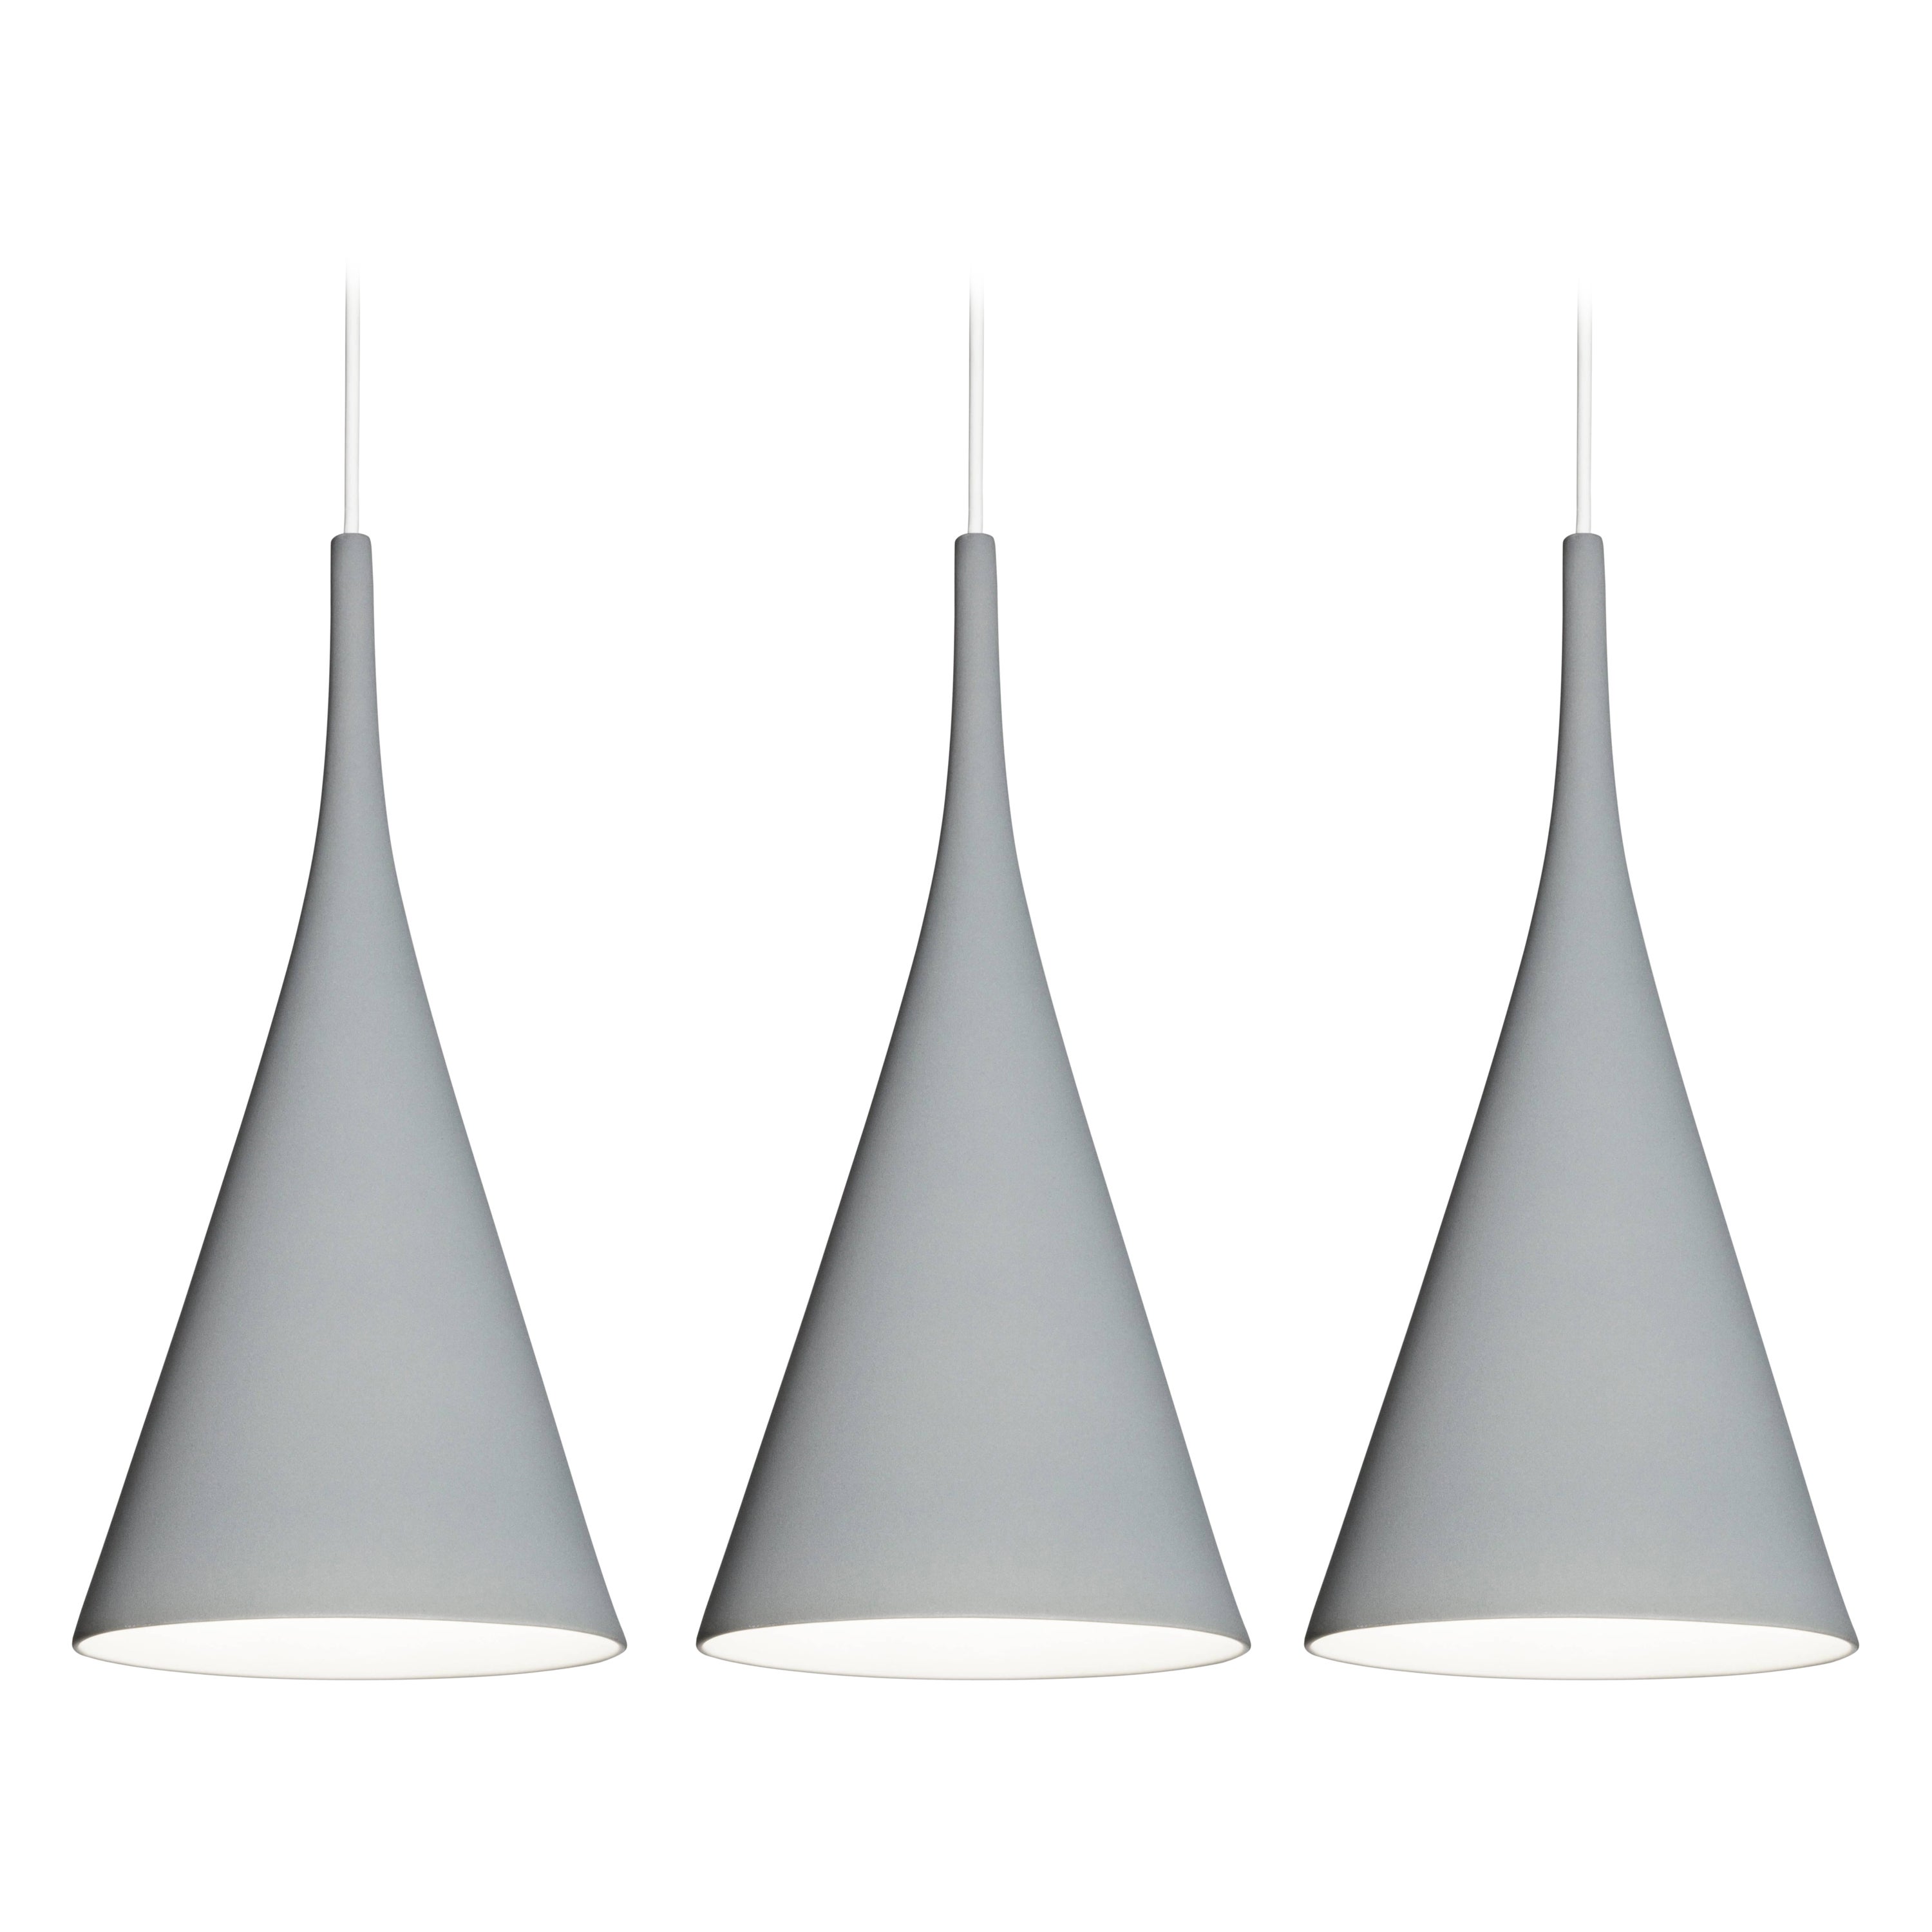 Pair of Samuli Naamanka 'Lambada' Ceramic Pendants in Grey for Innolux.

Designed by the internationally renowned Naamanka in 2013 and manufactured in Finland through artful hand casting. The minimal and refined shape and a smooth matte ceramic